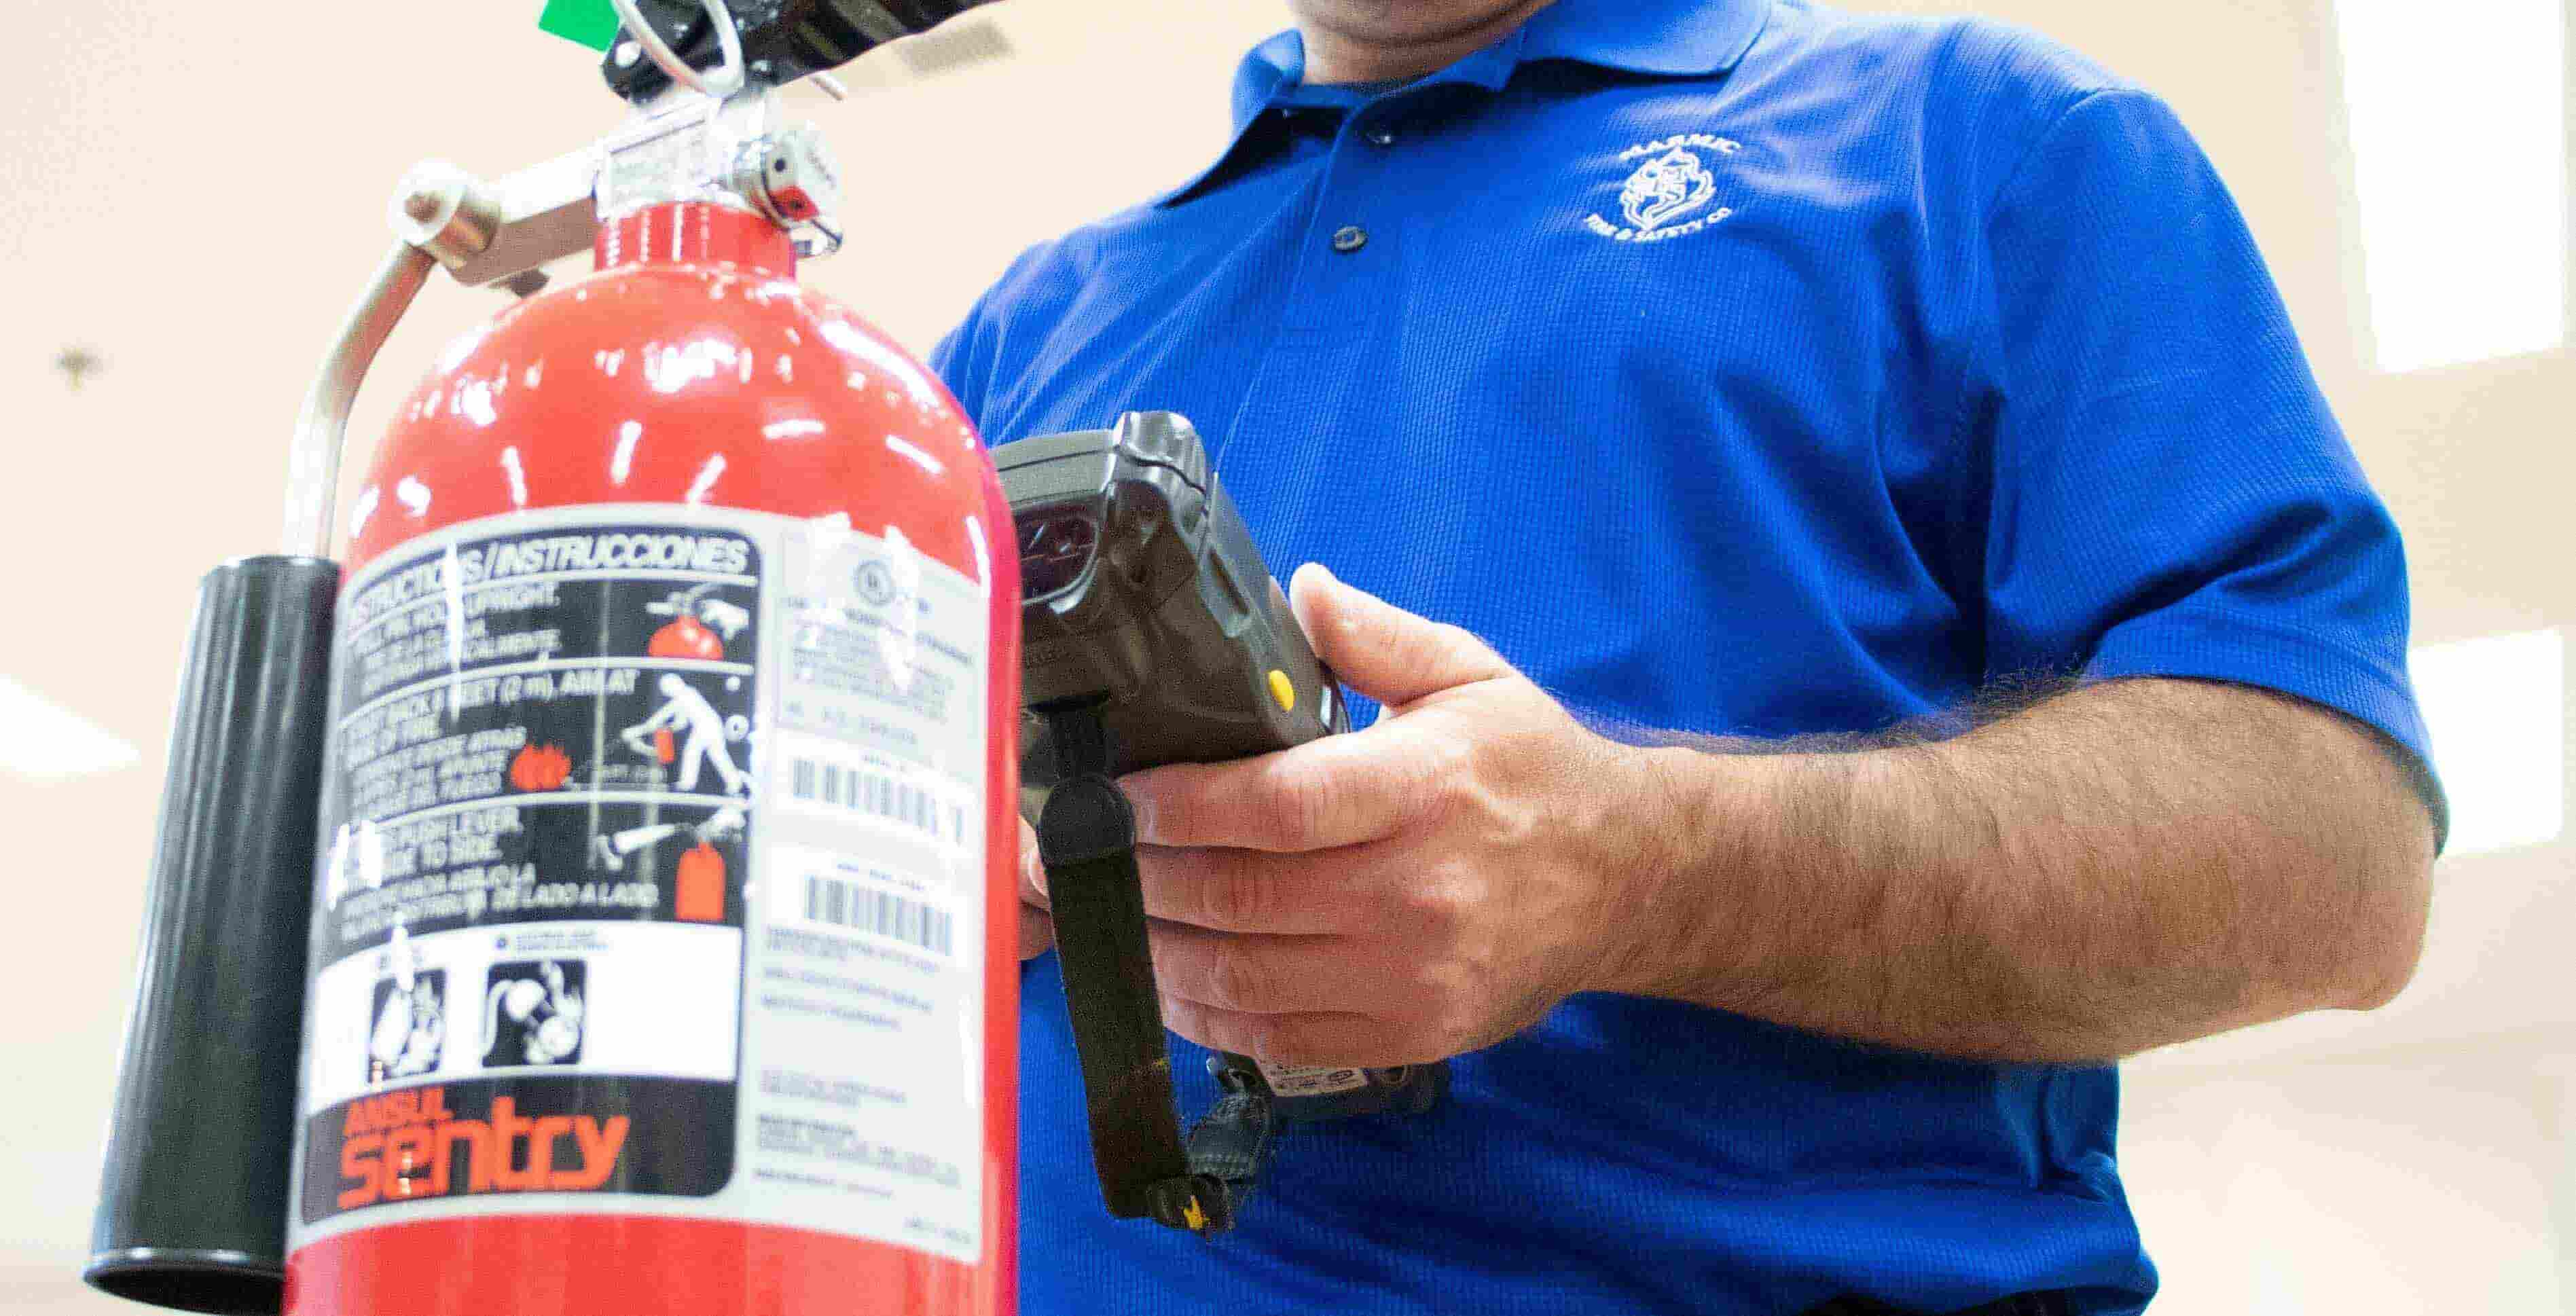 Home Fire Extinguisher 